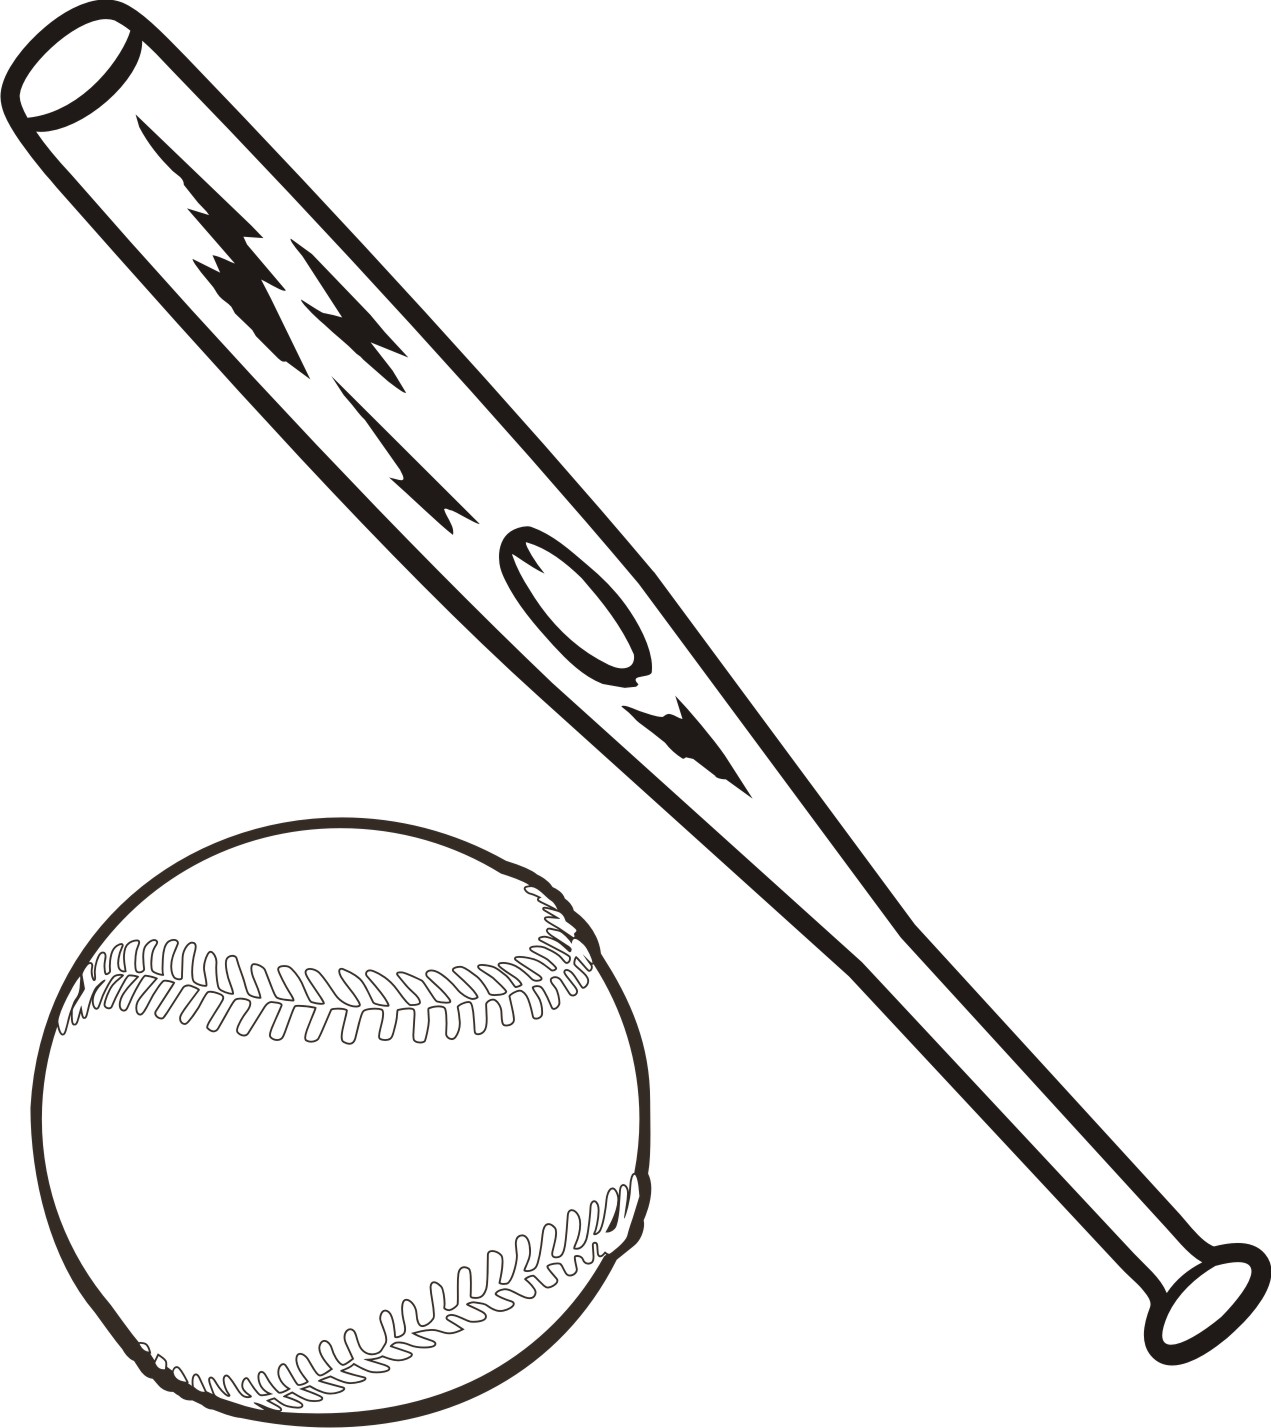 Picture Of Baseball Bat And Ball - ClipArt Best